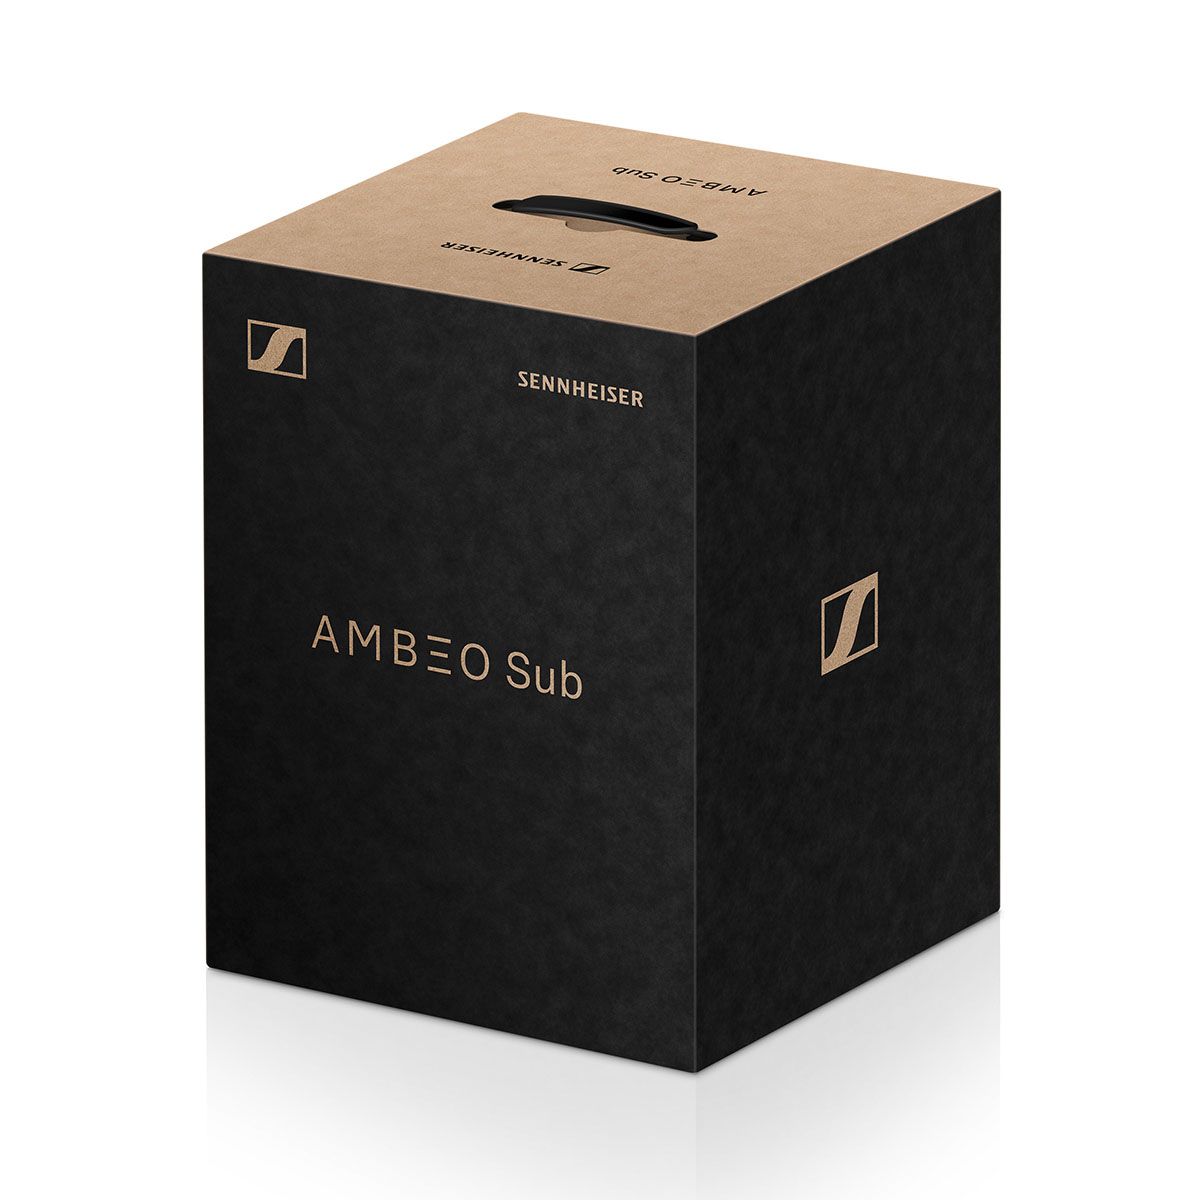 Sennheiser Ambeo Sub packaging on white background at angle